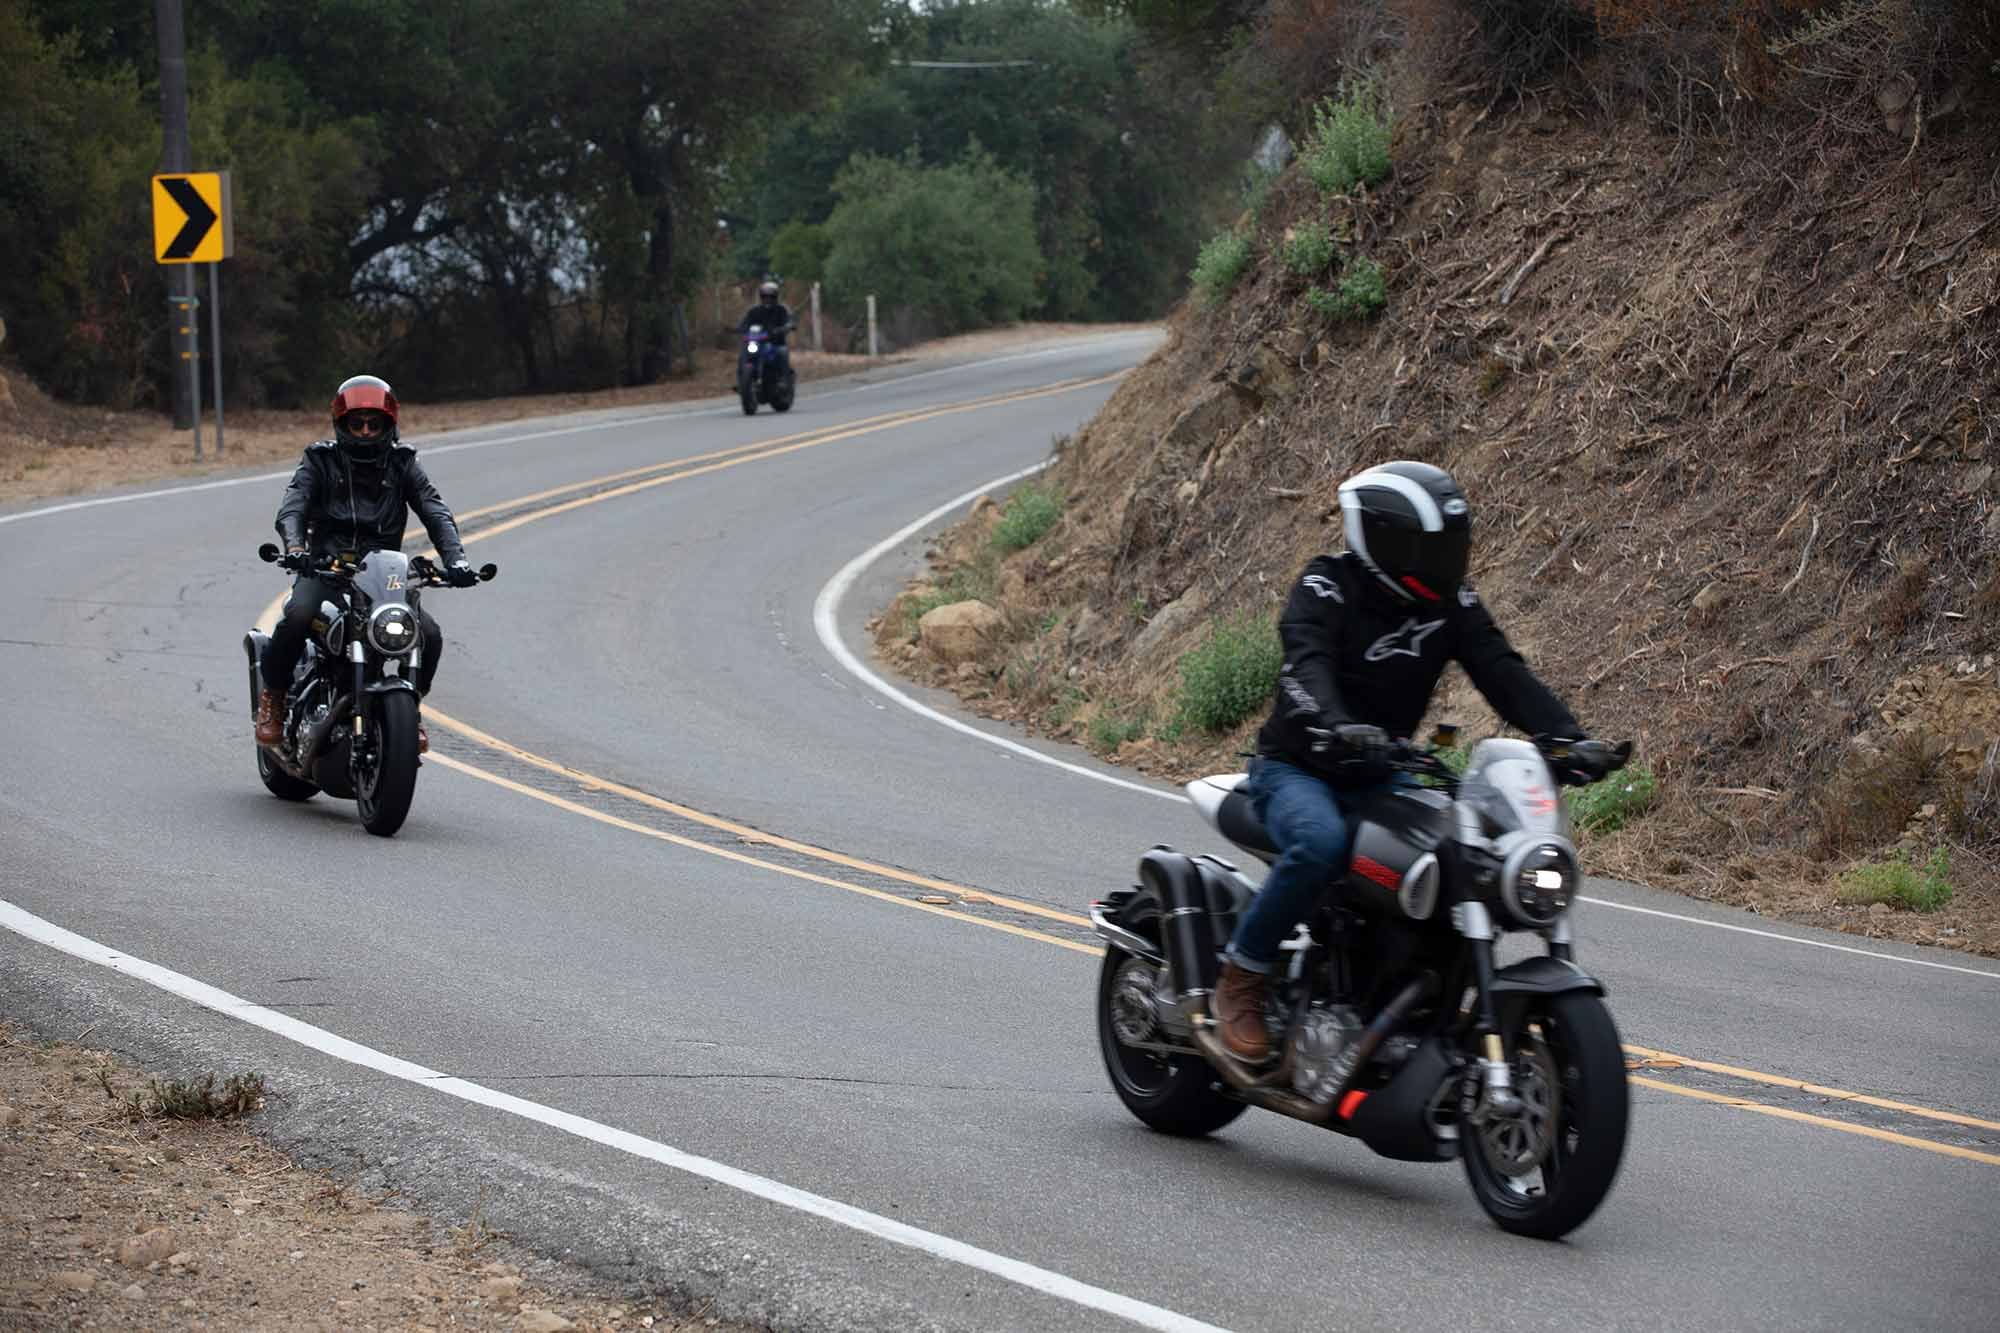 Gard Hollinger leading the group, followed by Senior Editor Morgan Gales, and Keanu Reeves in the rear.